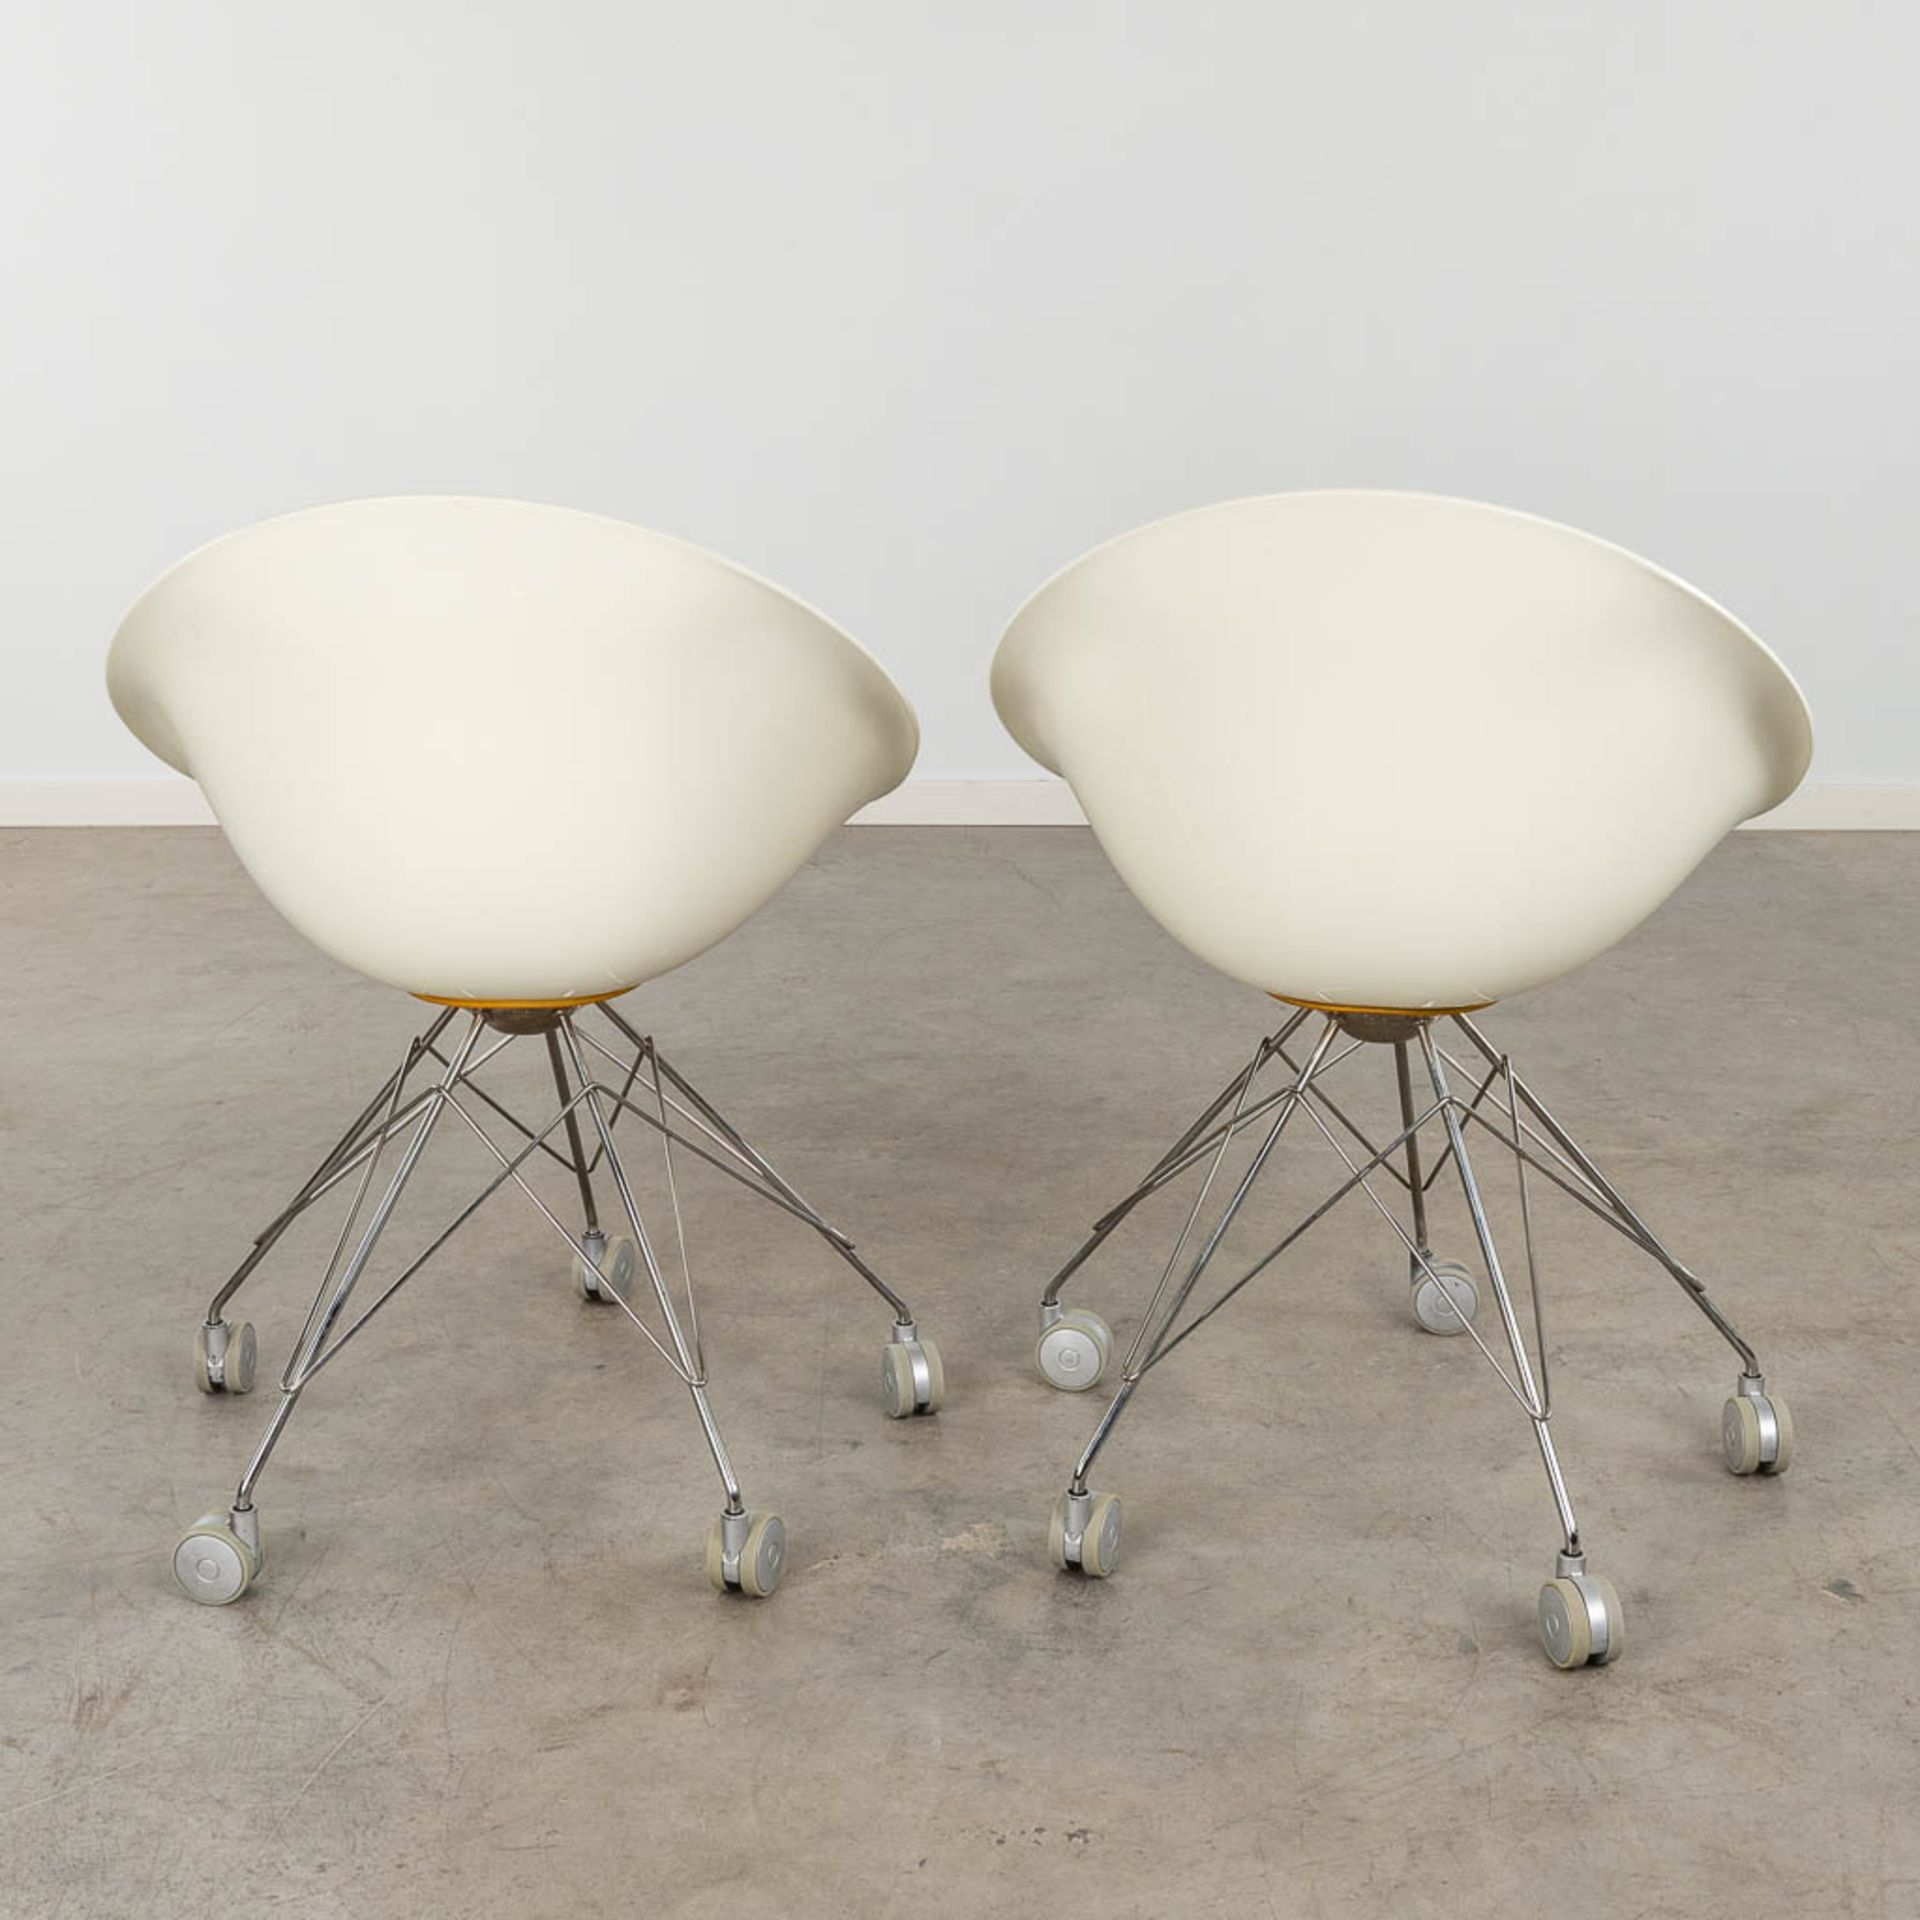 Philippe STARCK (1949) 'Ero' for Kartell, two office chairs. (D:59 x W:62 x H:82 cm) - Image 5 of 14